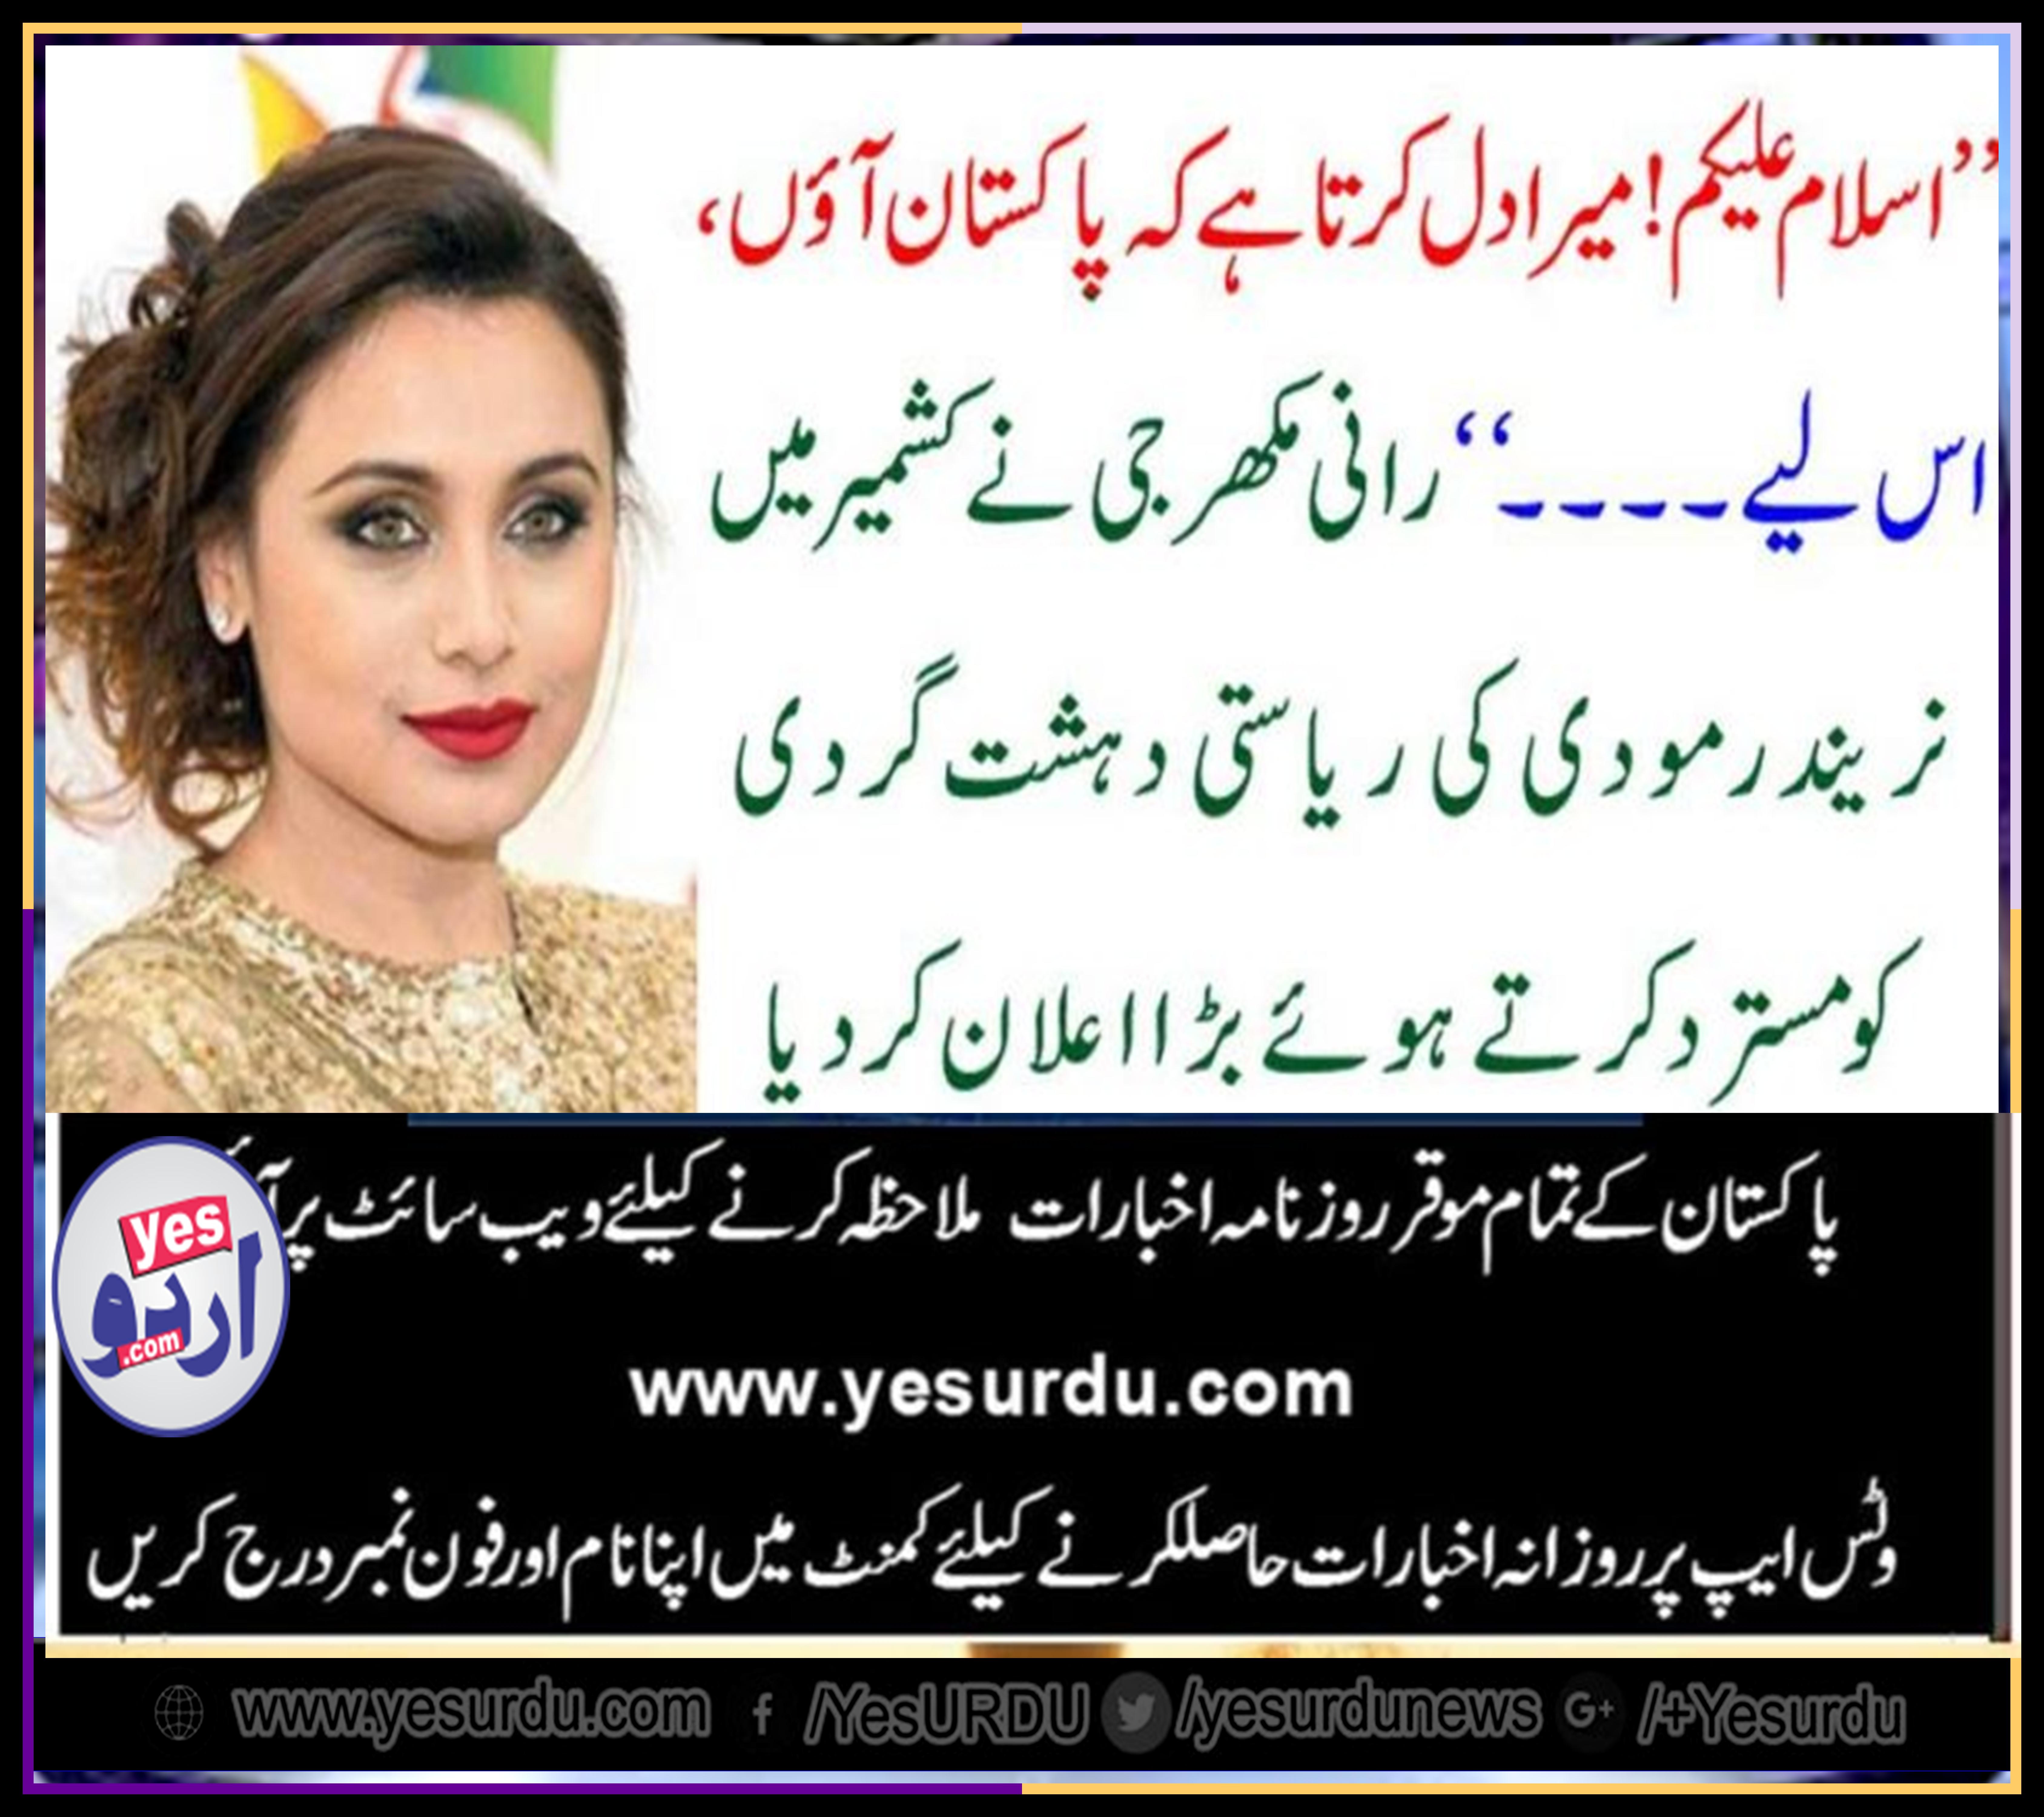 Rani Mukherjee, stated, in, favor, of, Kashmiries, and, Pakistanis, says, want, to, visit, Pakistan